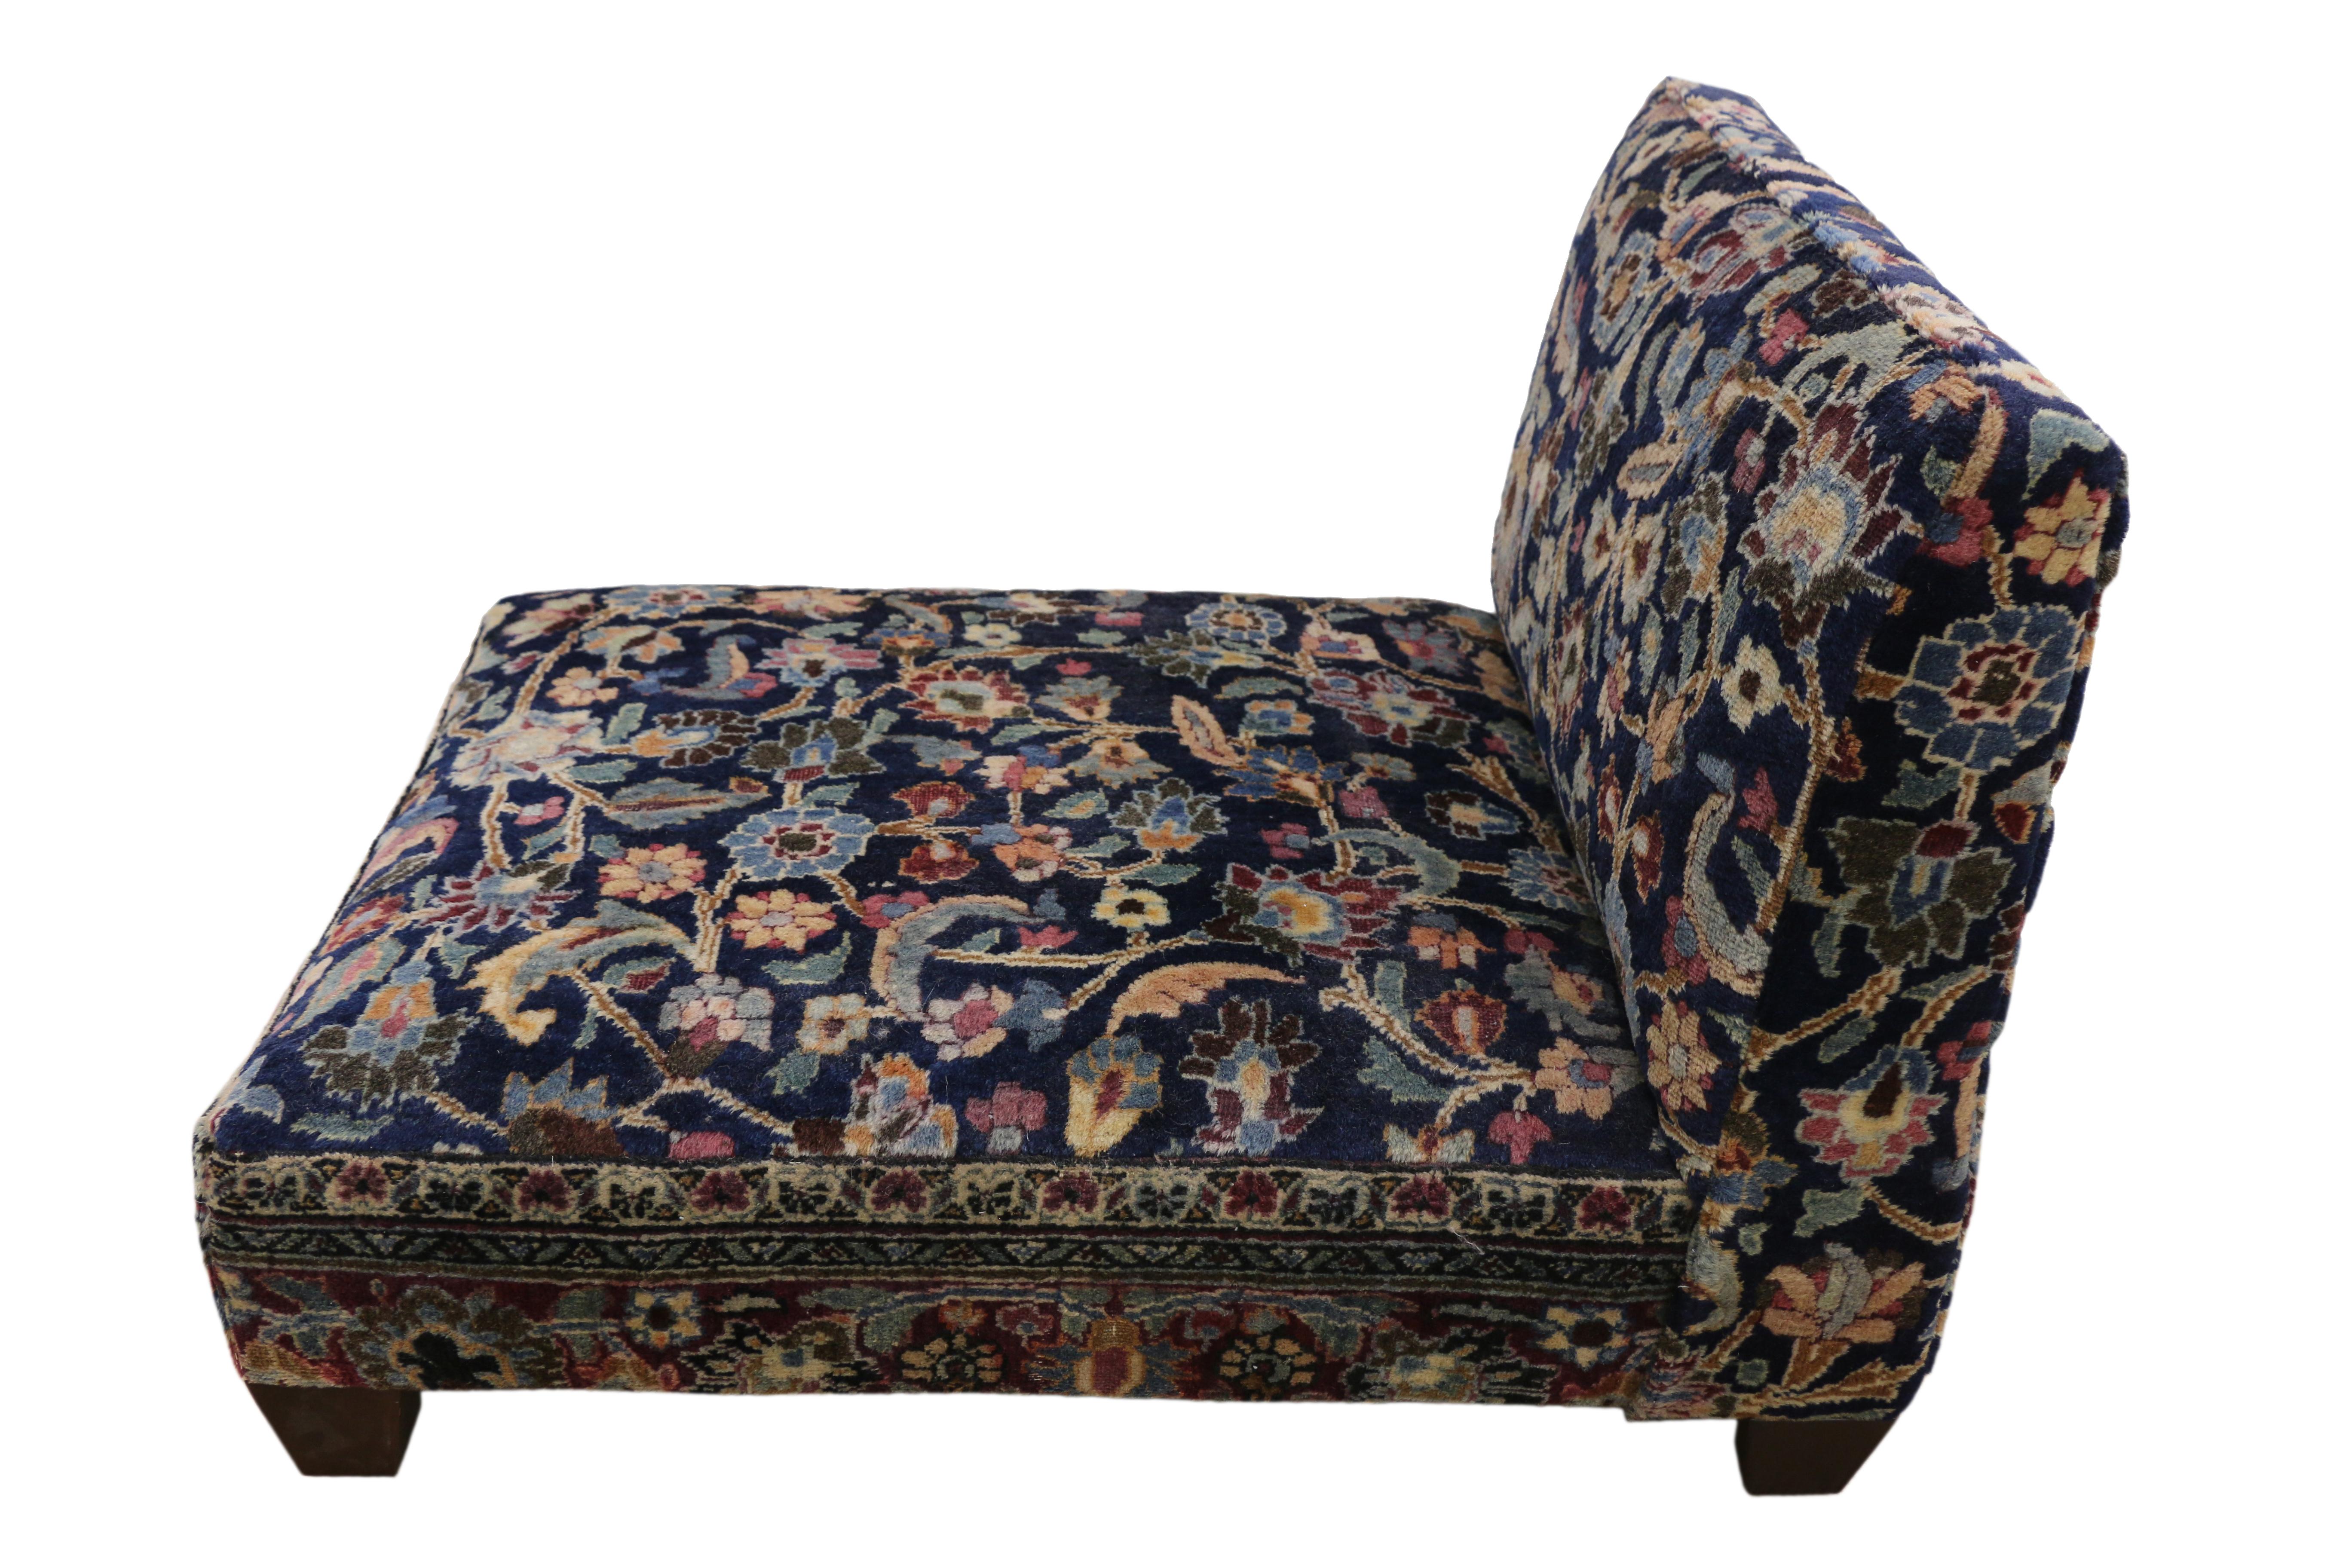 200000 Low profile slipper chair or Persian rug Petbed from antique Persian Khorassan rug. This hand knotted wool late 19th century antique Persian Khorassan rug was converted into low profile slipper chair or perhaps it can be used as a luxury dog